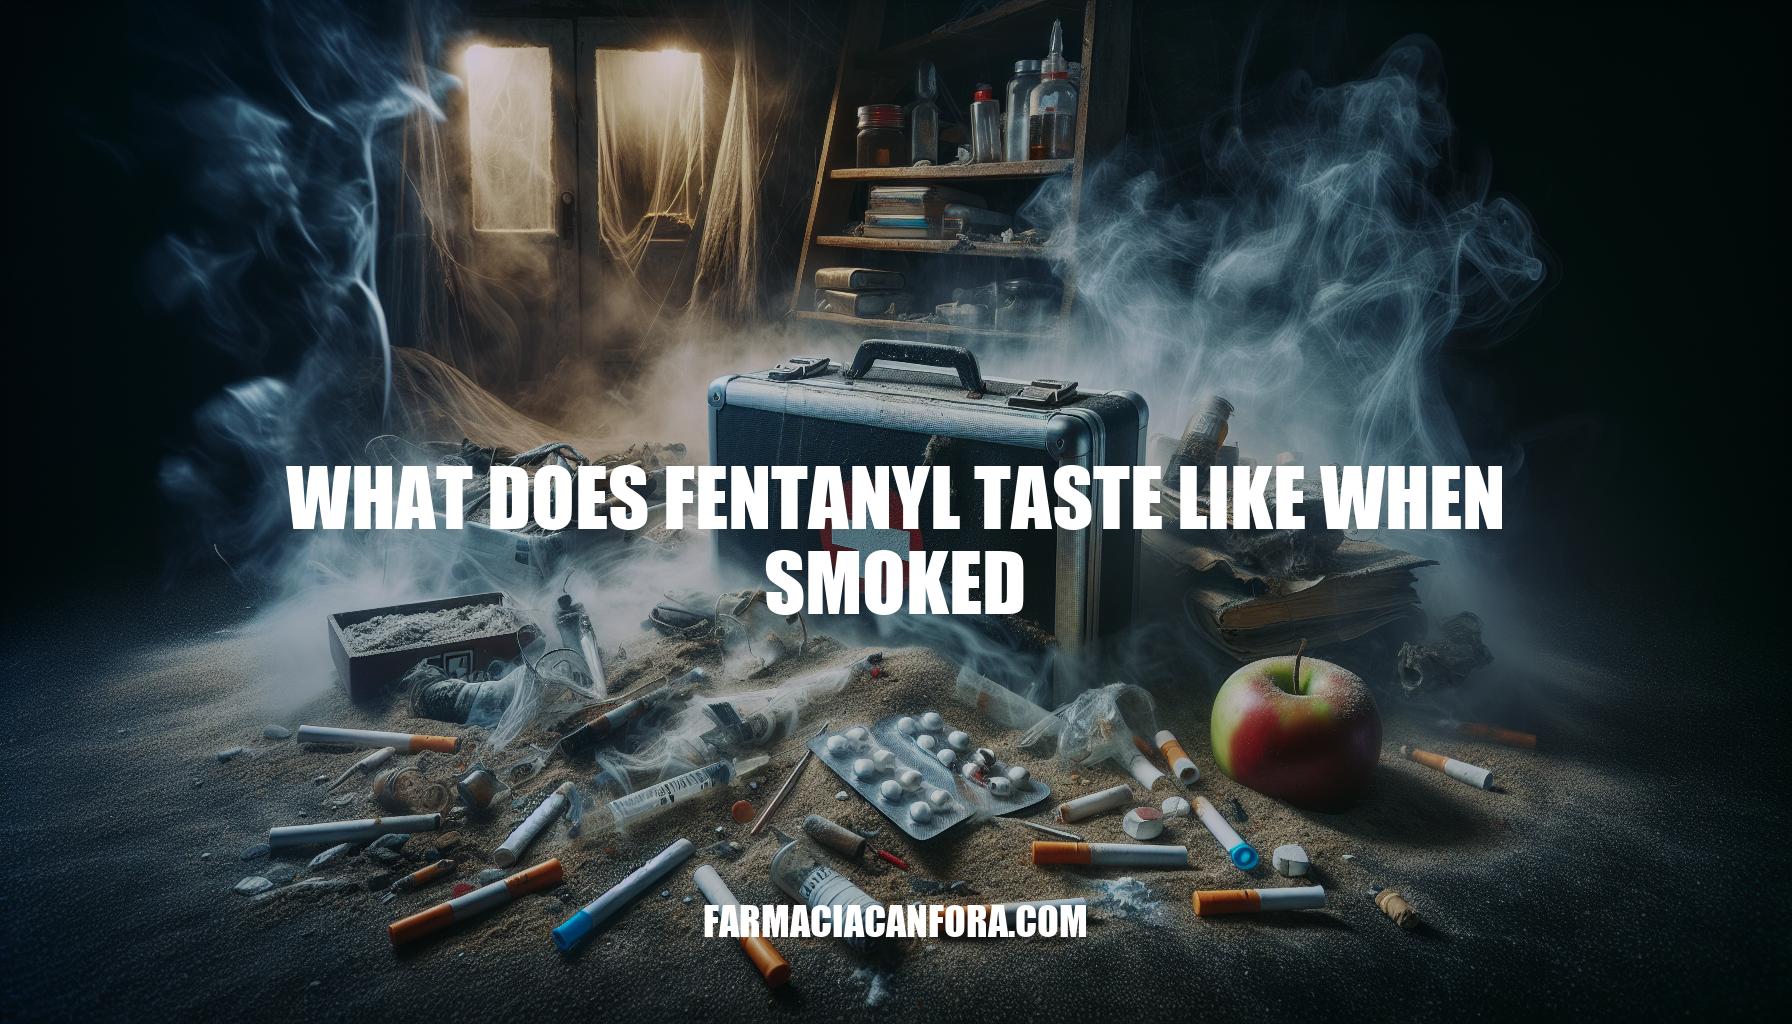 What Does Fentanyl Taste Like When Smoked: Dangers and Effects